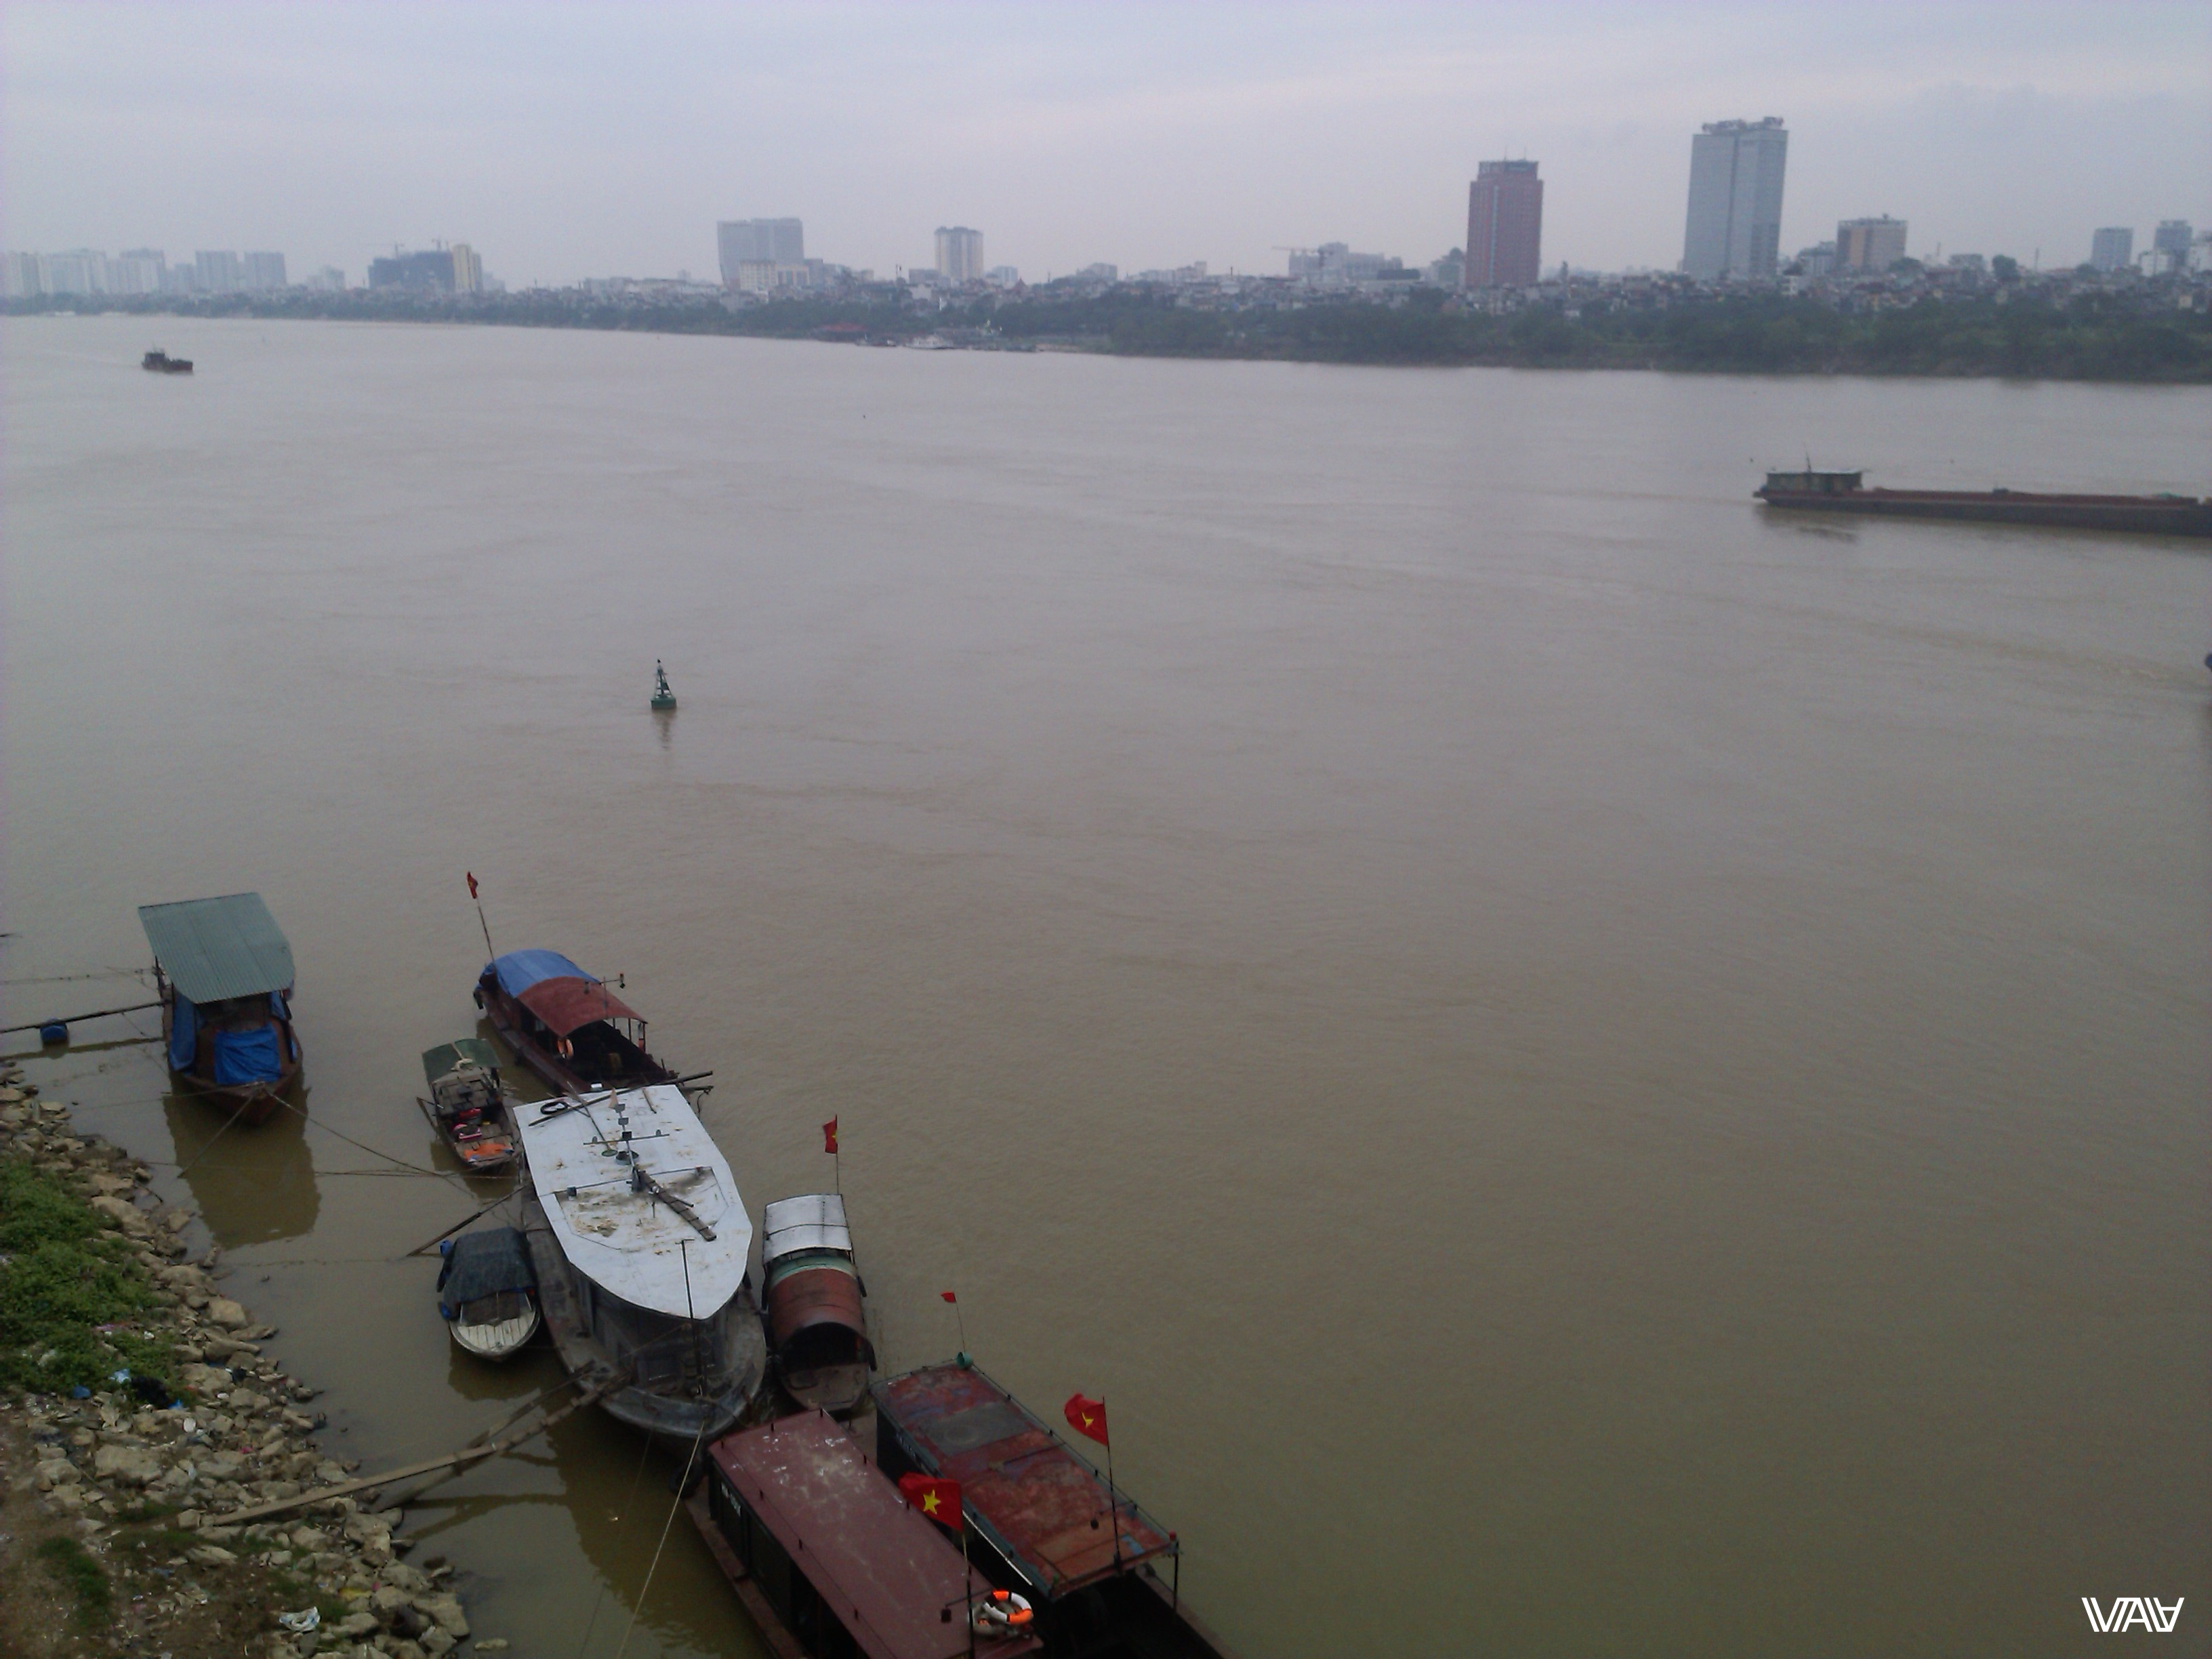 Incredibly but this river is called Red. That is a completely different color in reality. Hanoi, Vietnam